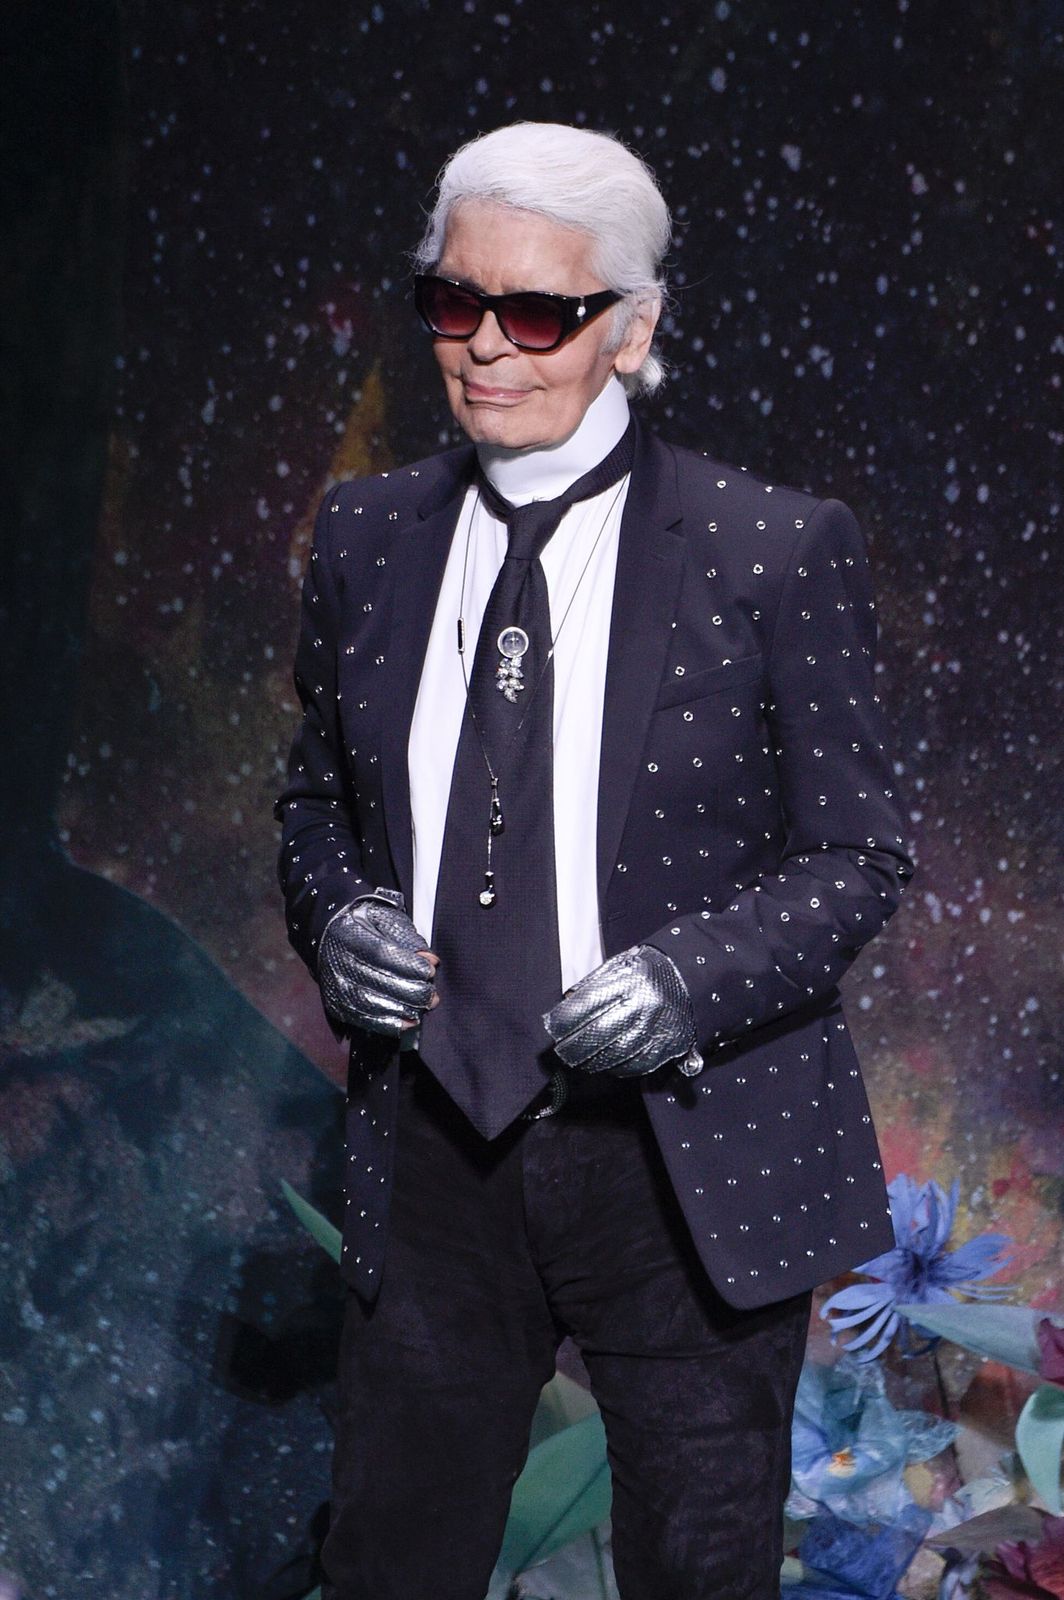 Karl Lagerfeld at the Fendi Haute Couture Fall/Winter 2017-2018 show as part of Haute Couture Paris Fashion Week on July 5, 2017 in France. | Photo: Getty Images